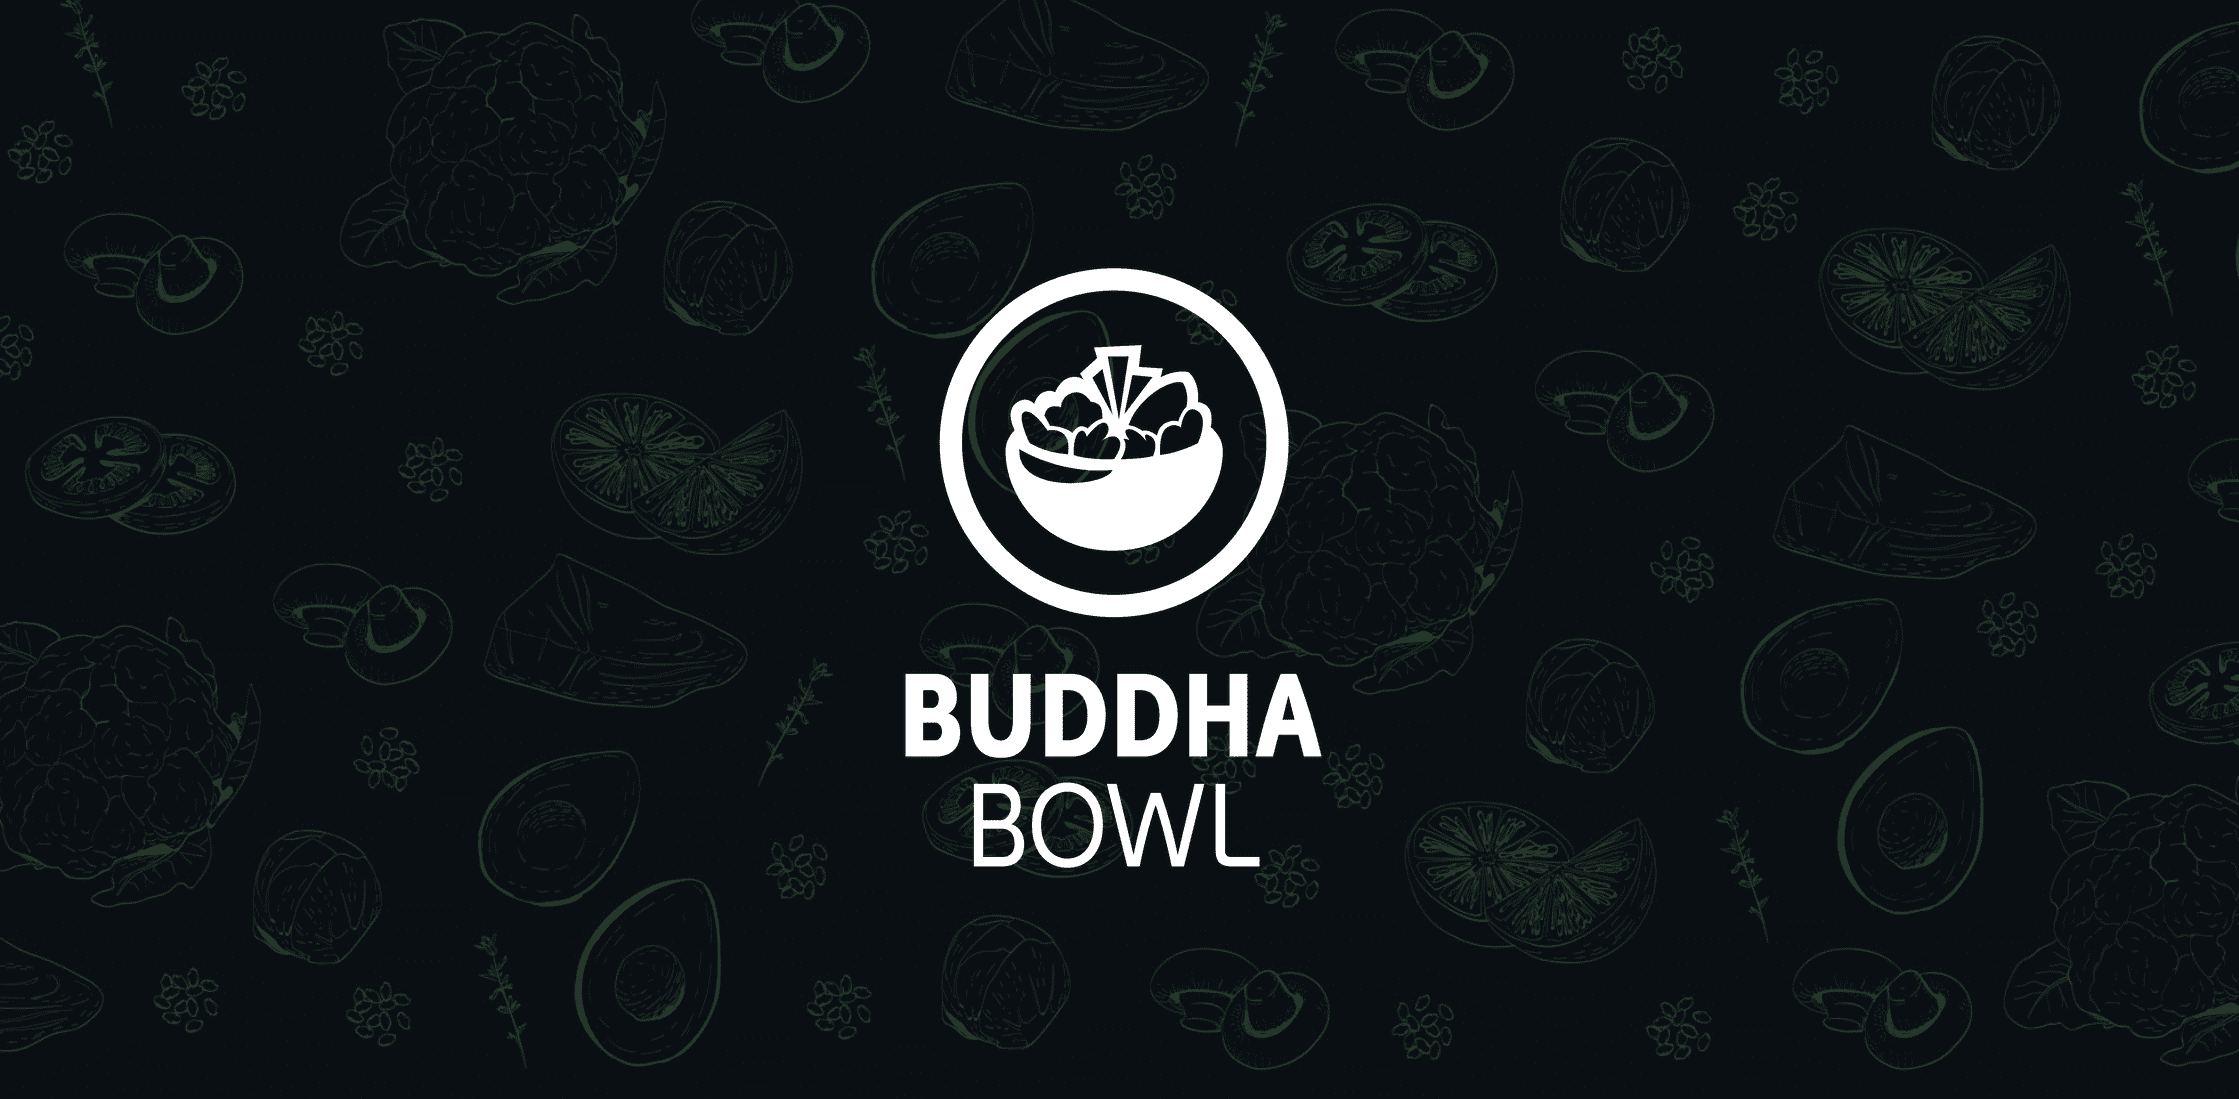 IU C&I Studios Page White Buddha Bowl logo with black illustration wall with green drawings of meat, fruits and vegetables